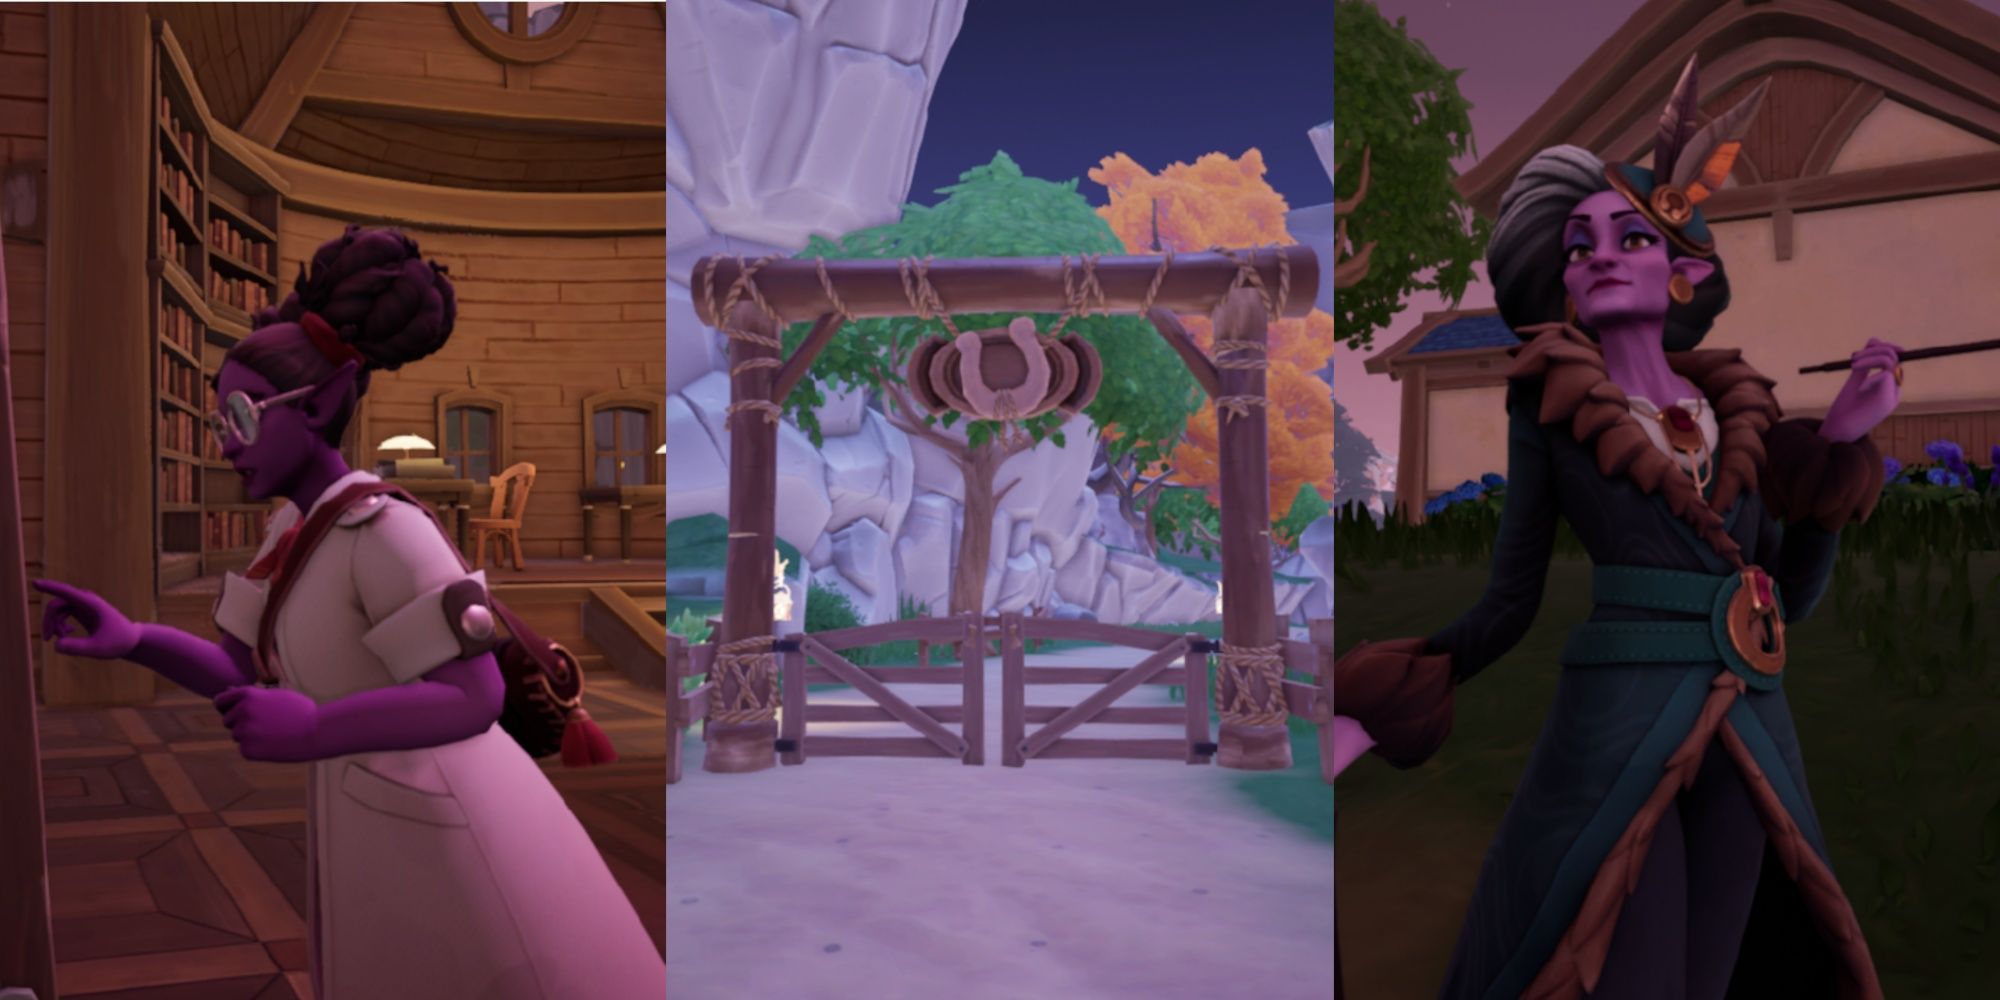 Split image featuring Jina leaning in and looking at a bookshelf in the library, the exit gate of a player housing plot, and Eshe standing near a building while on patrol in the evening in Palia.